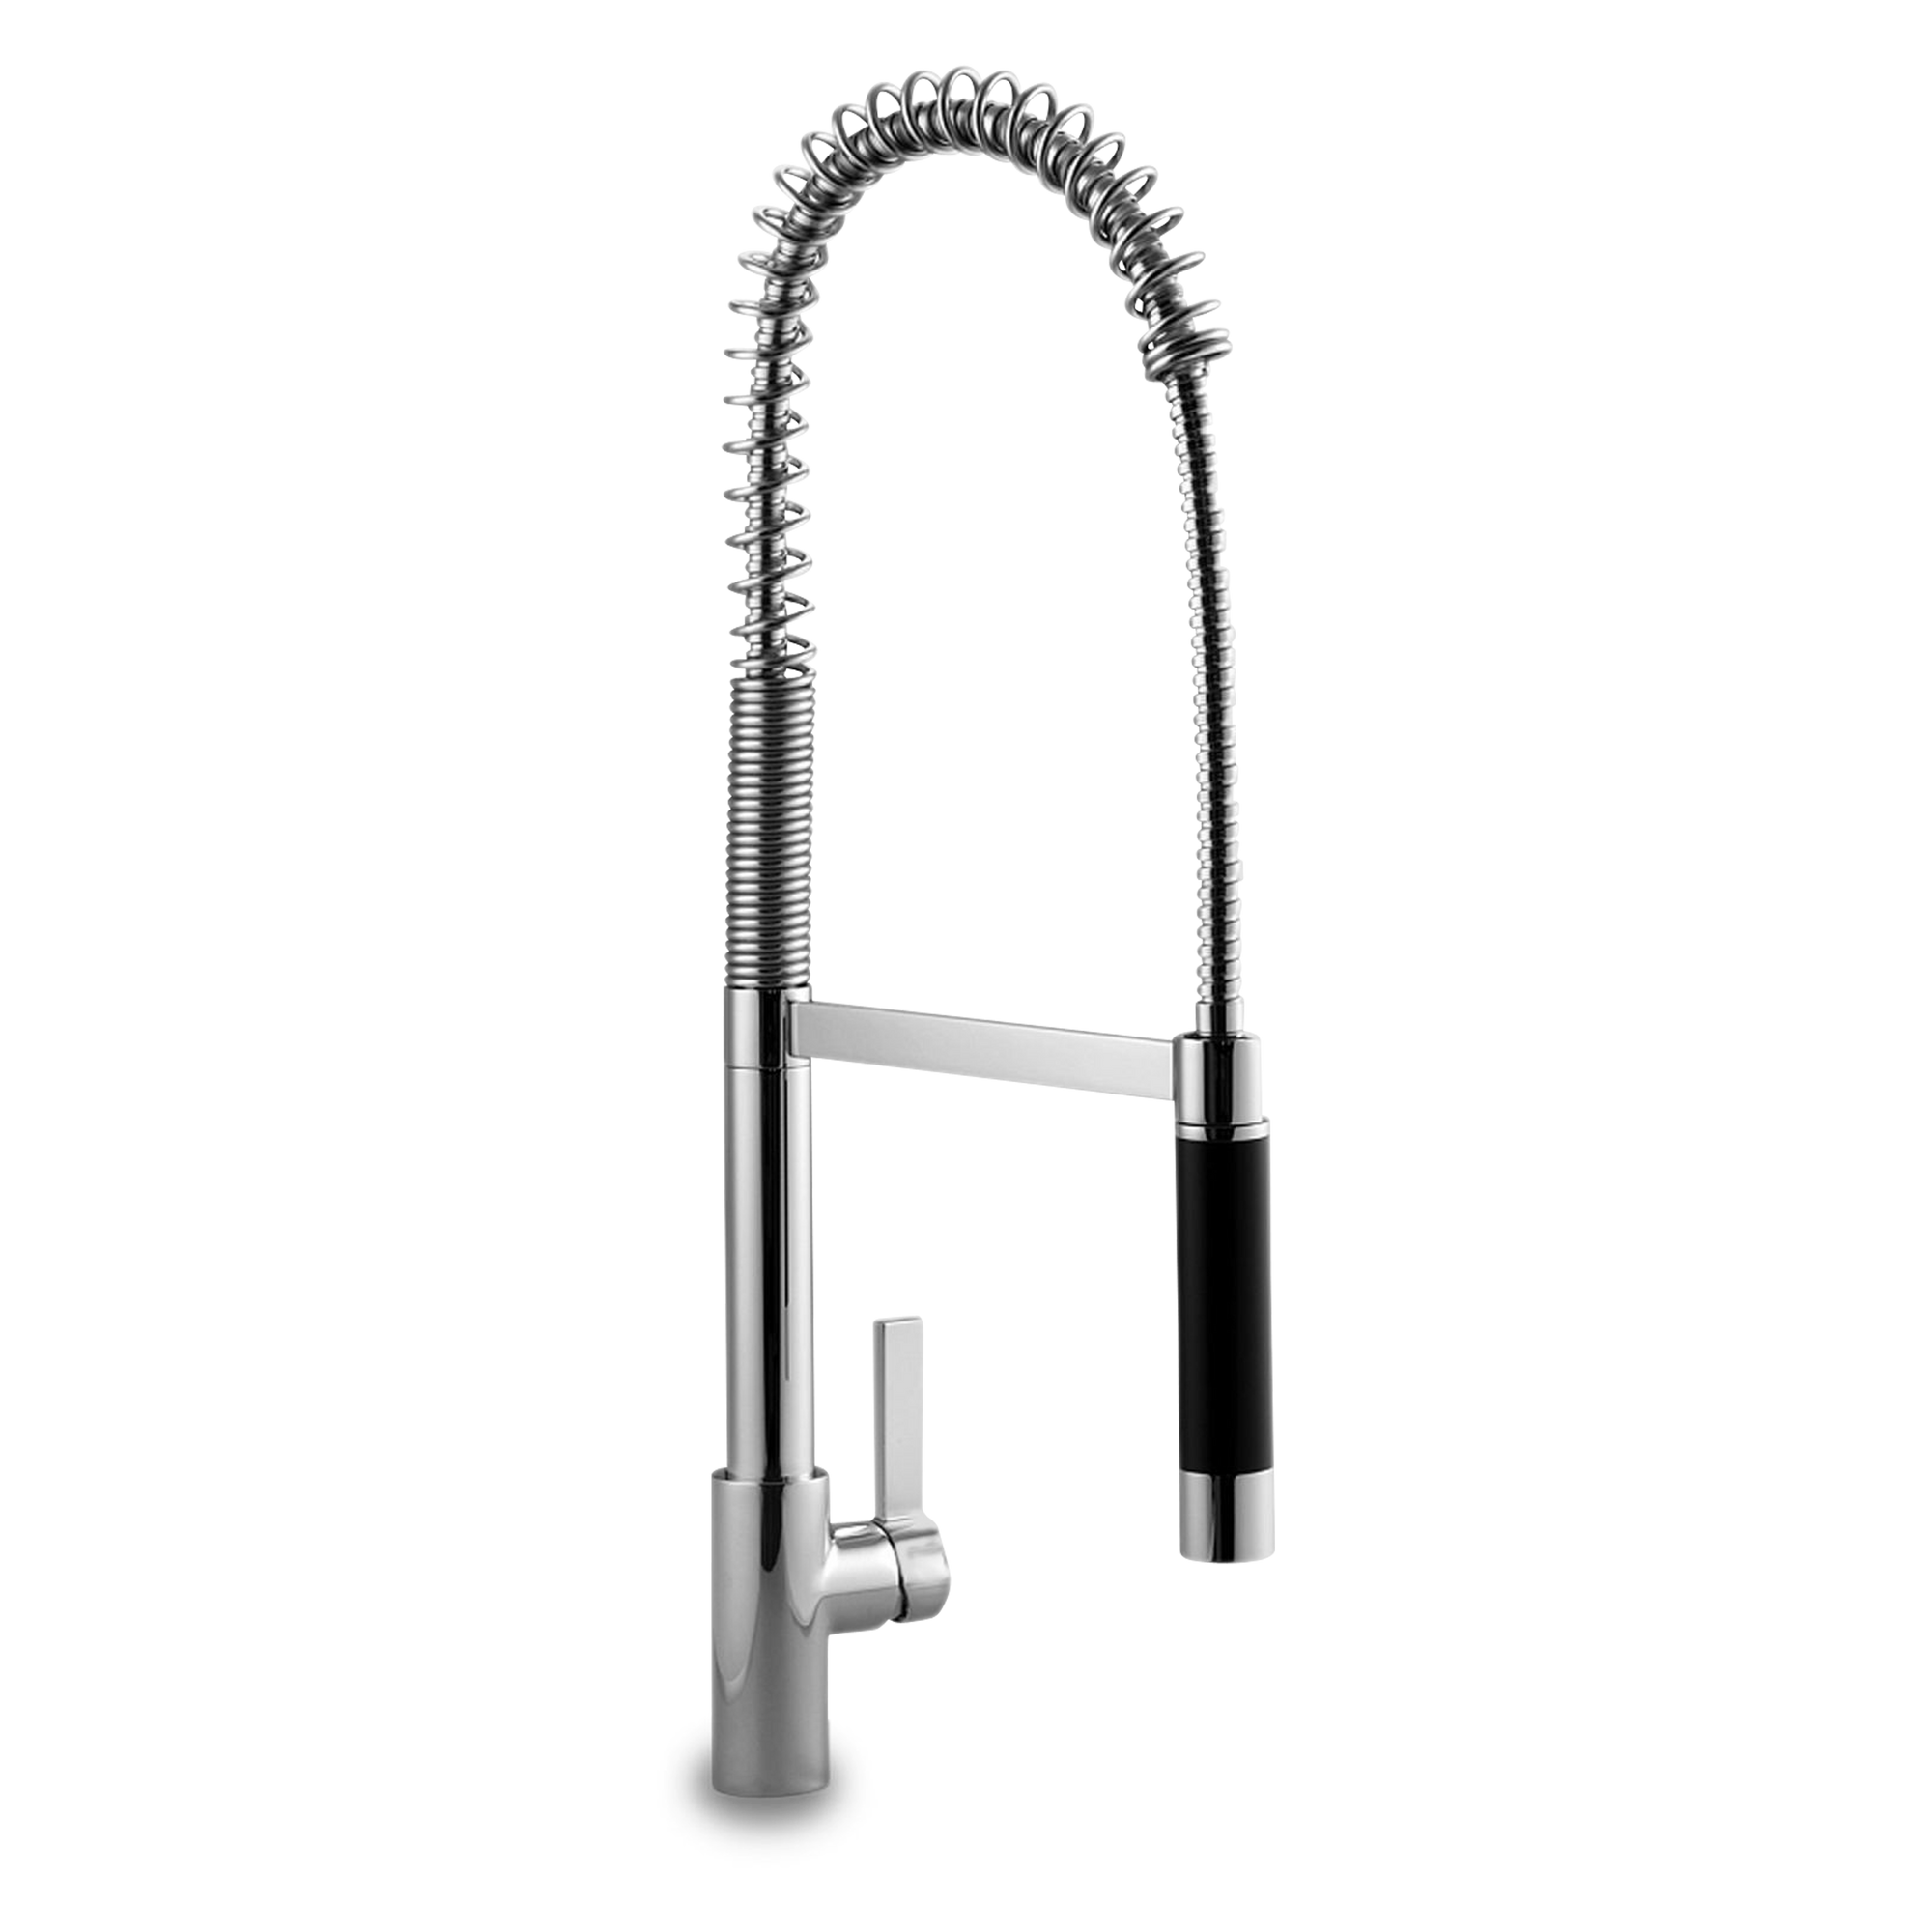 A sleek, modern faucet with single-lever operation and Pro handspray and 360 degree pivot ability.